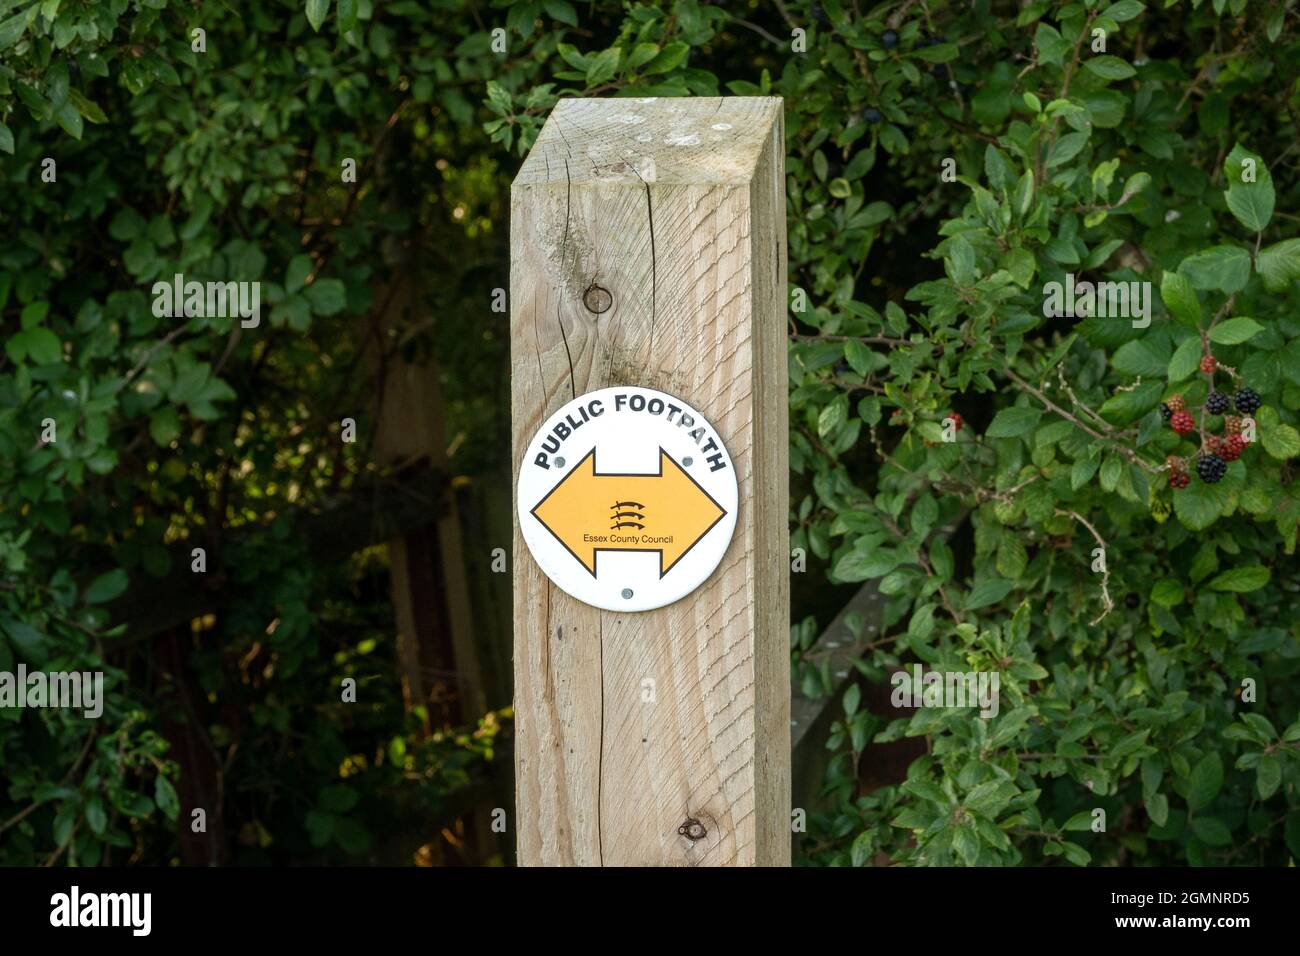 Public footpath sign on a roundel with yellow arrow on a white background mounted on a wooden post pointing left and right Stock Photo